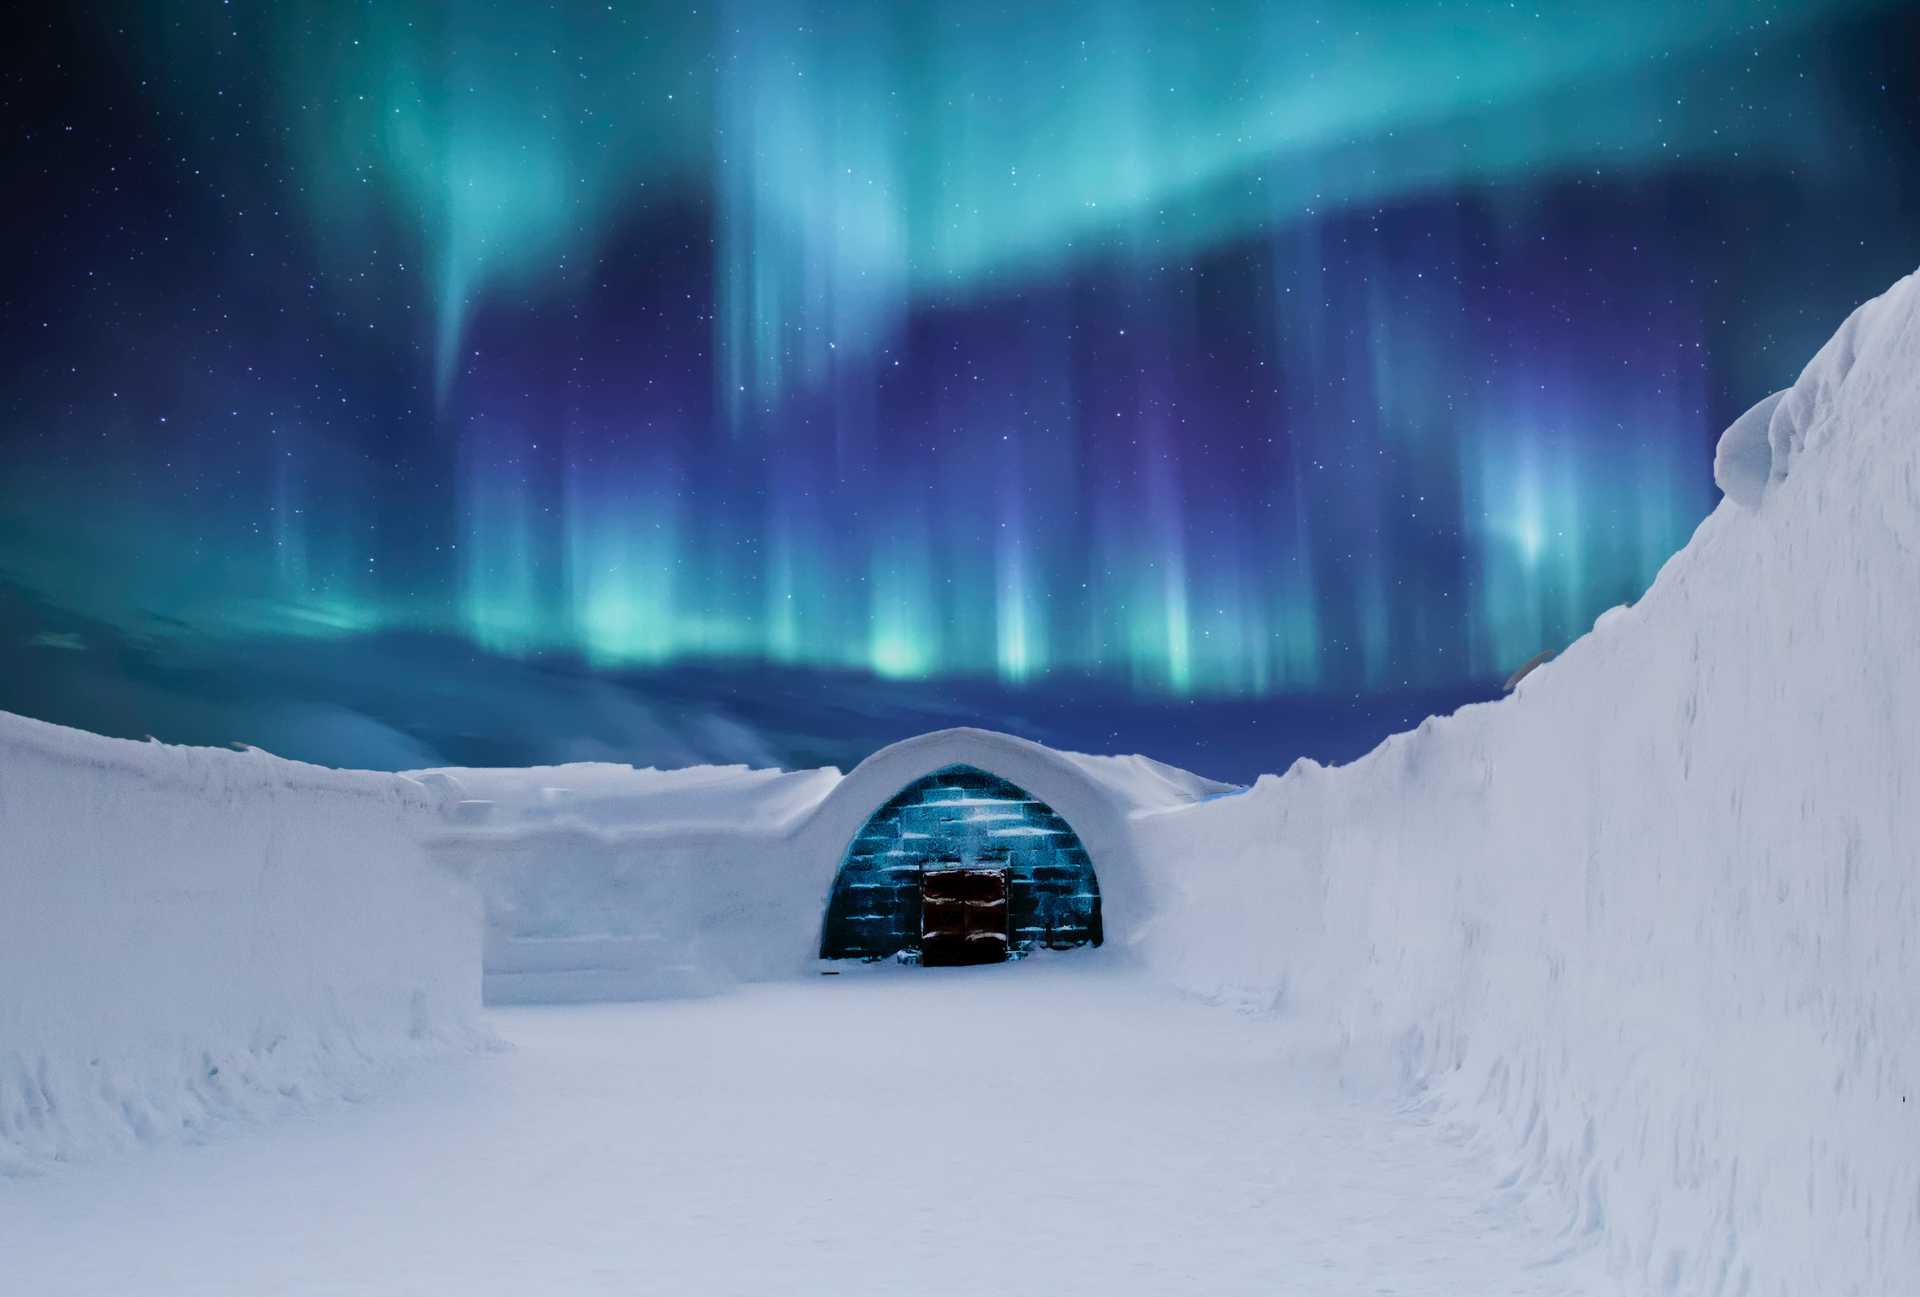 Aurora Borealis over a snow covered path leading to an igloo-like structure.